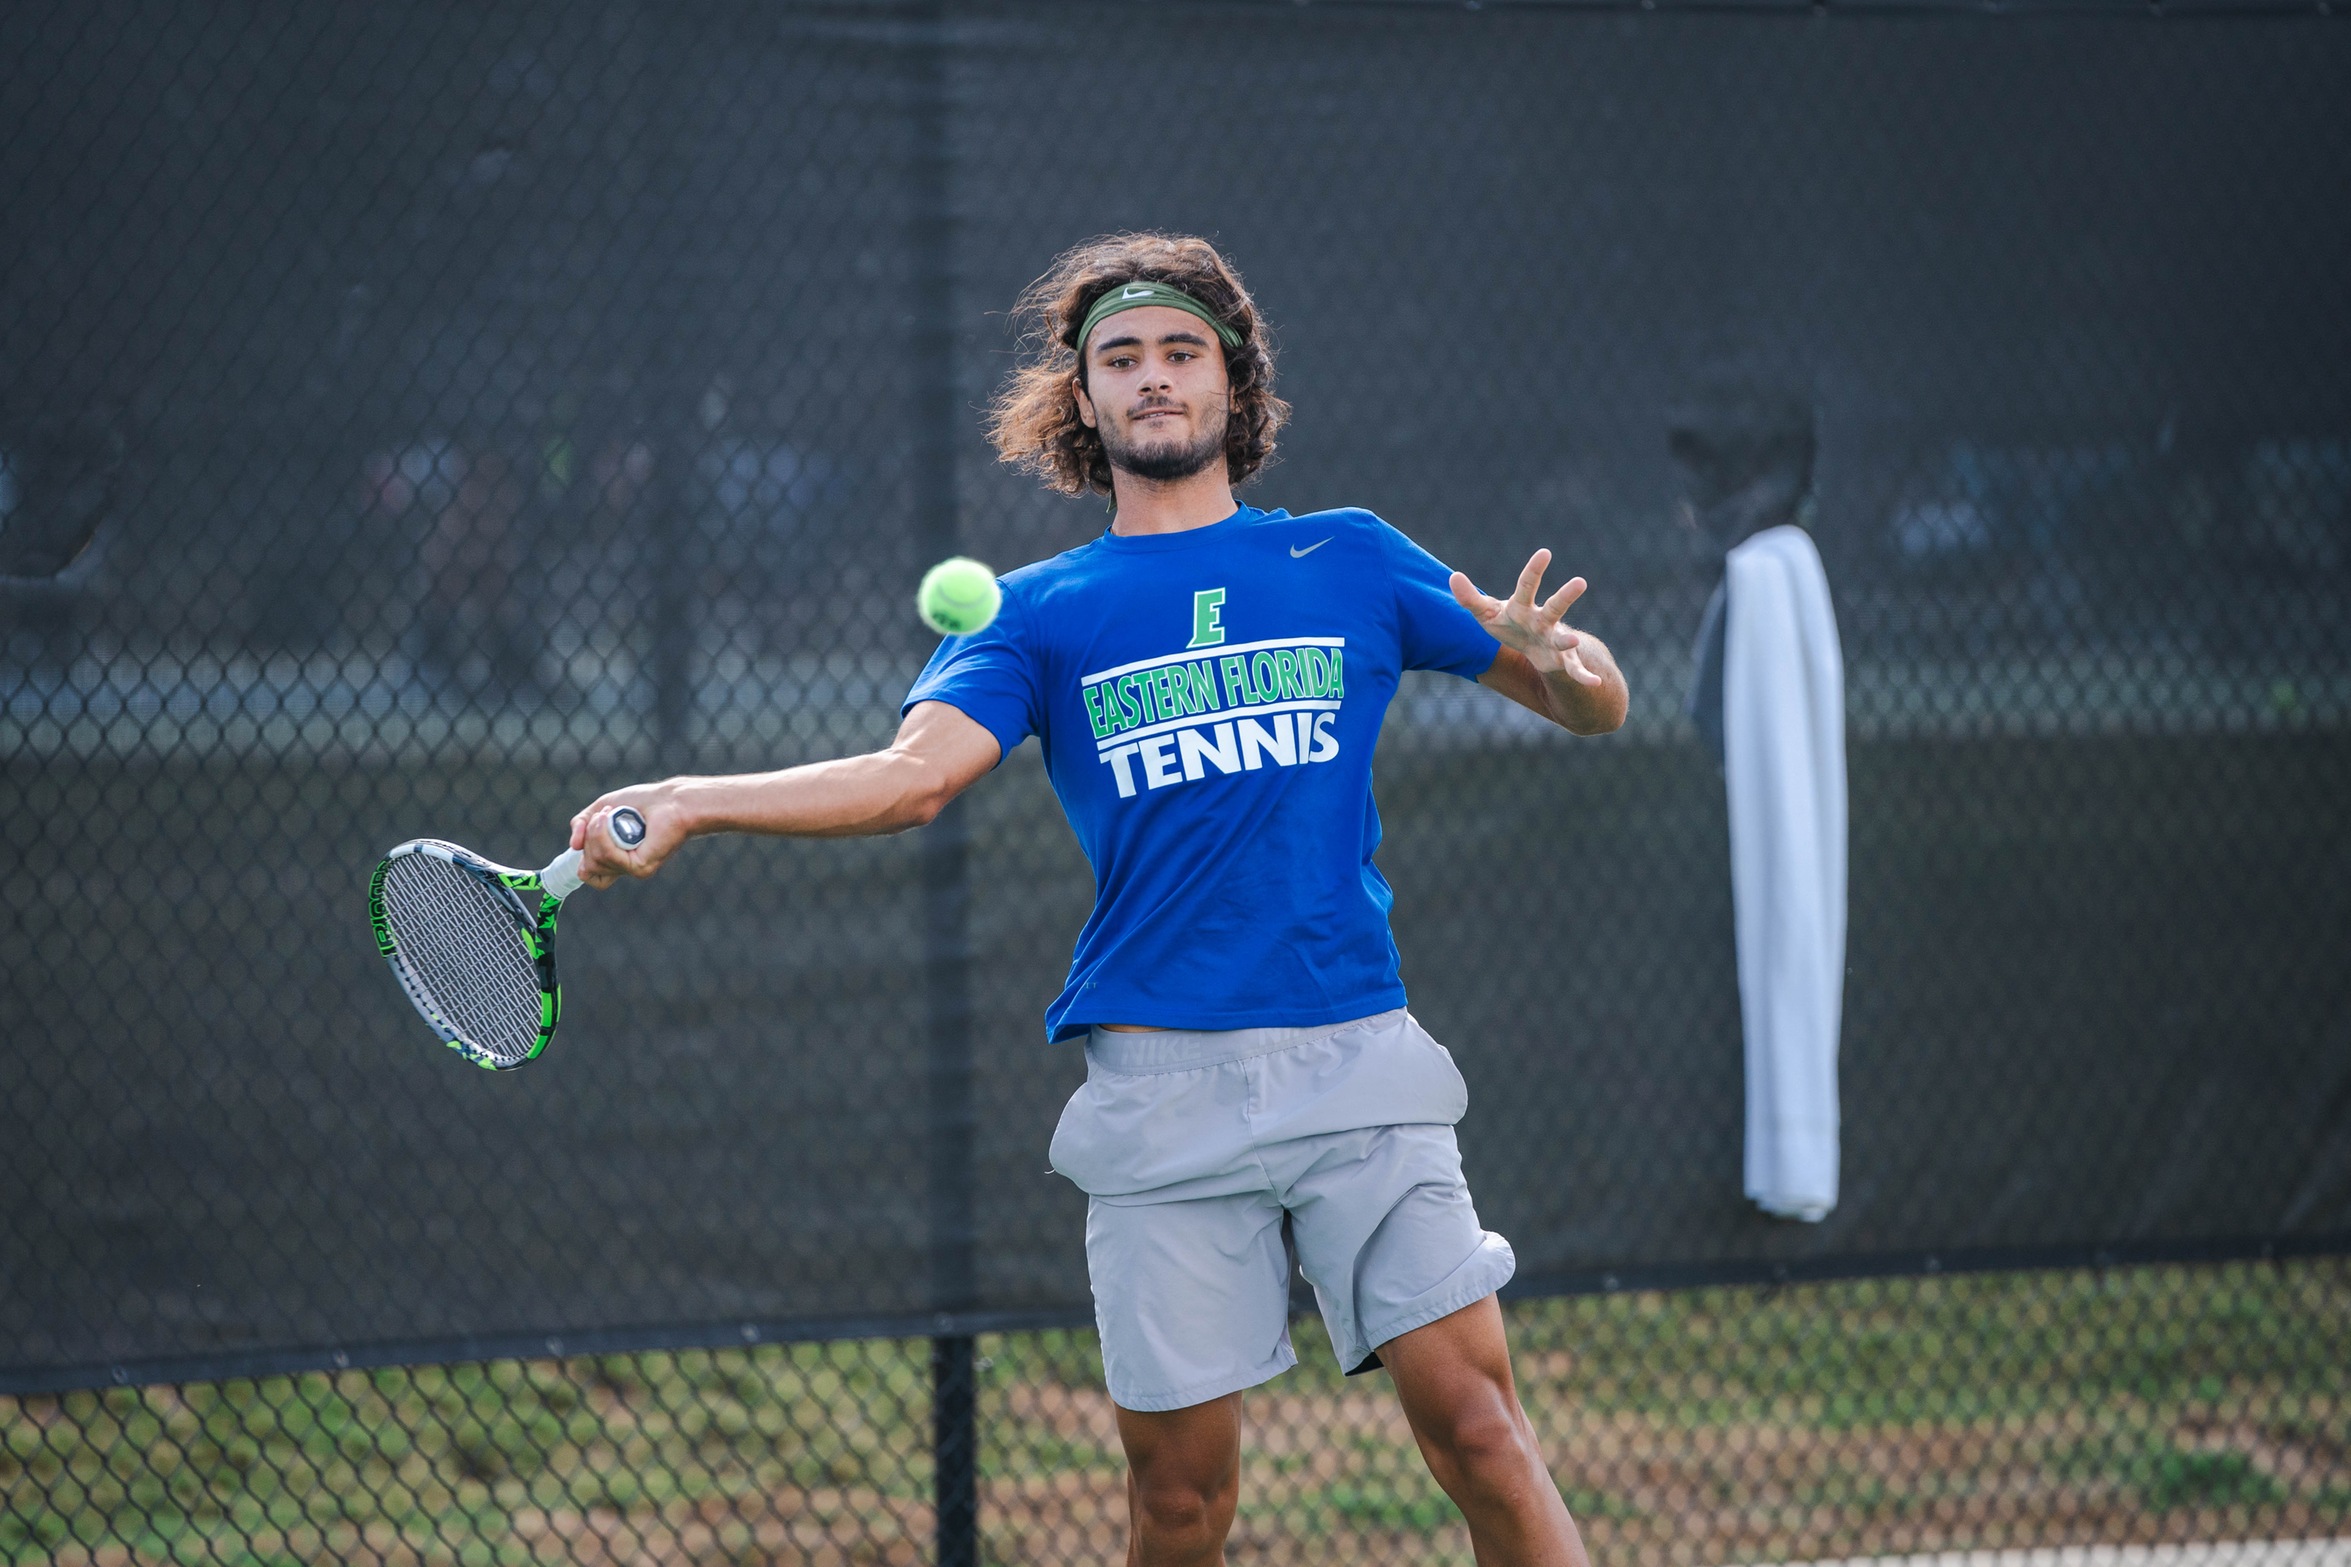 Men's tennis players ranked among top 50 in nation